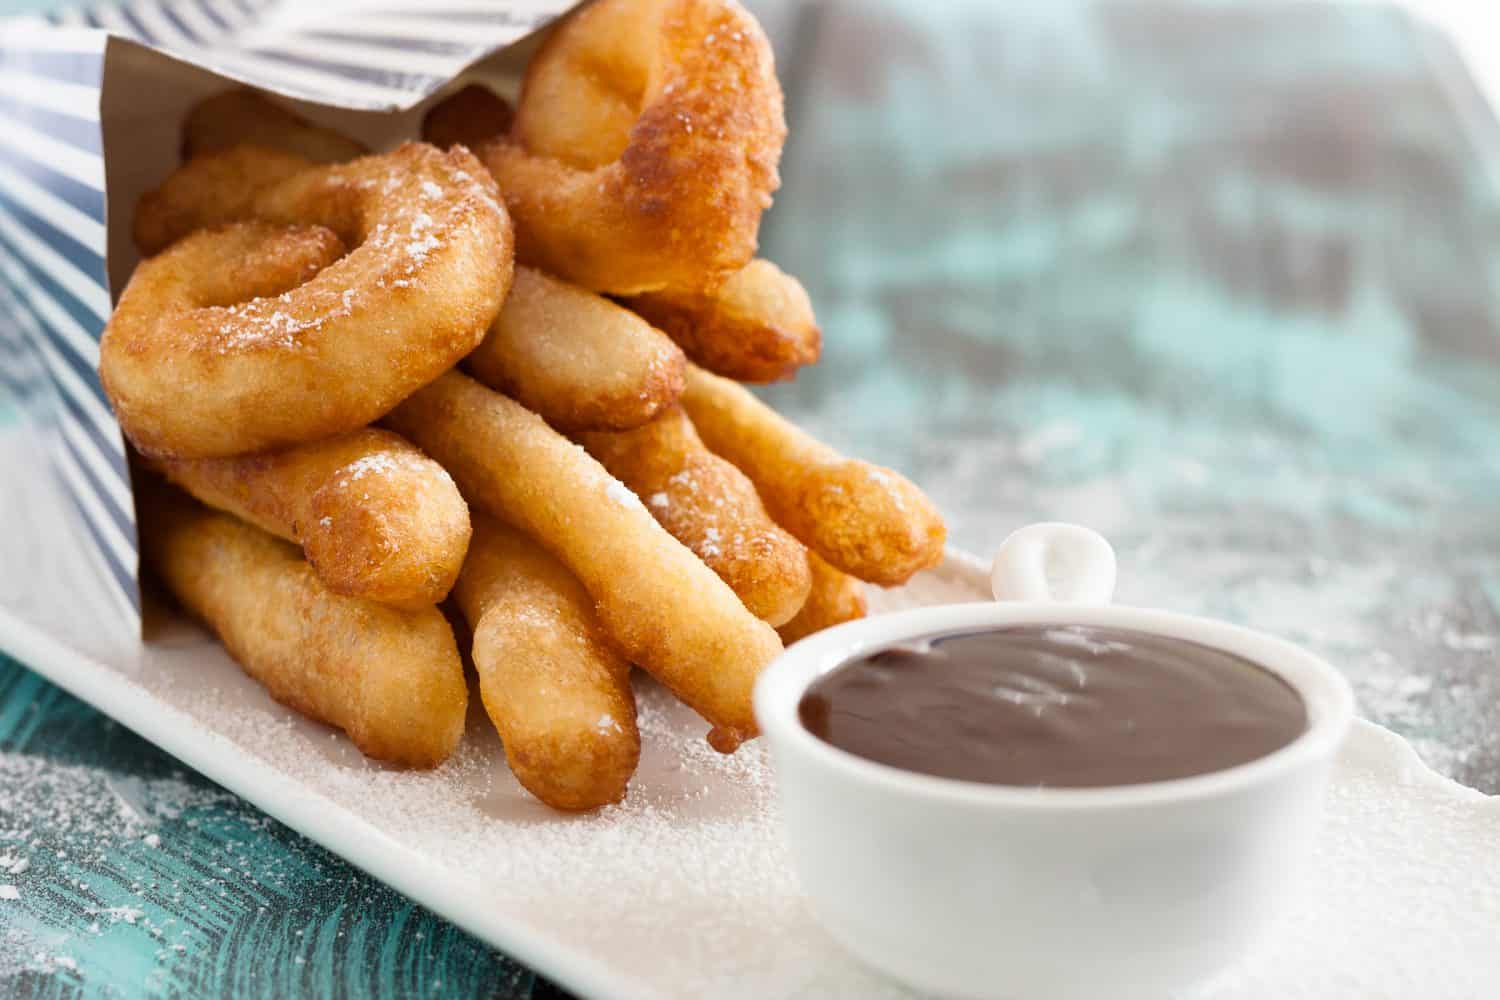  Spanish churros and chocolate are a common snack or even breakfast in Spain. This recipe - inspired by a trip to visit family - is a surprisingly easy Spanish treat. * Recipe on GoodieGodmother.com